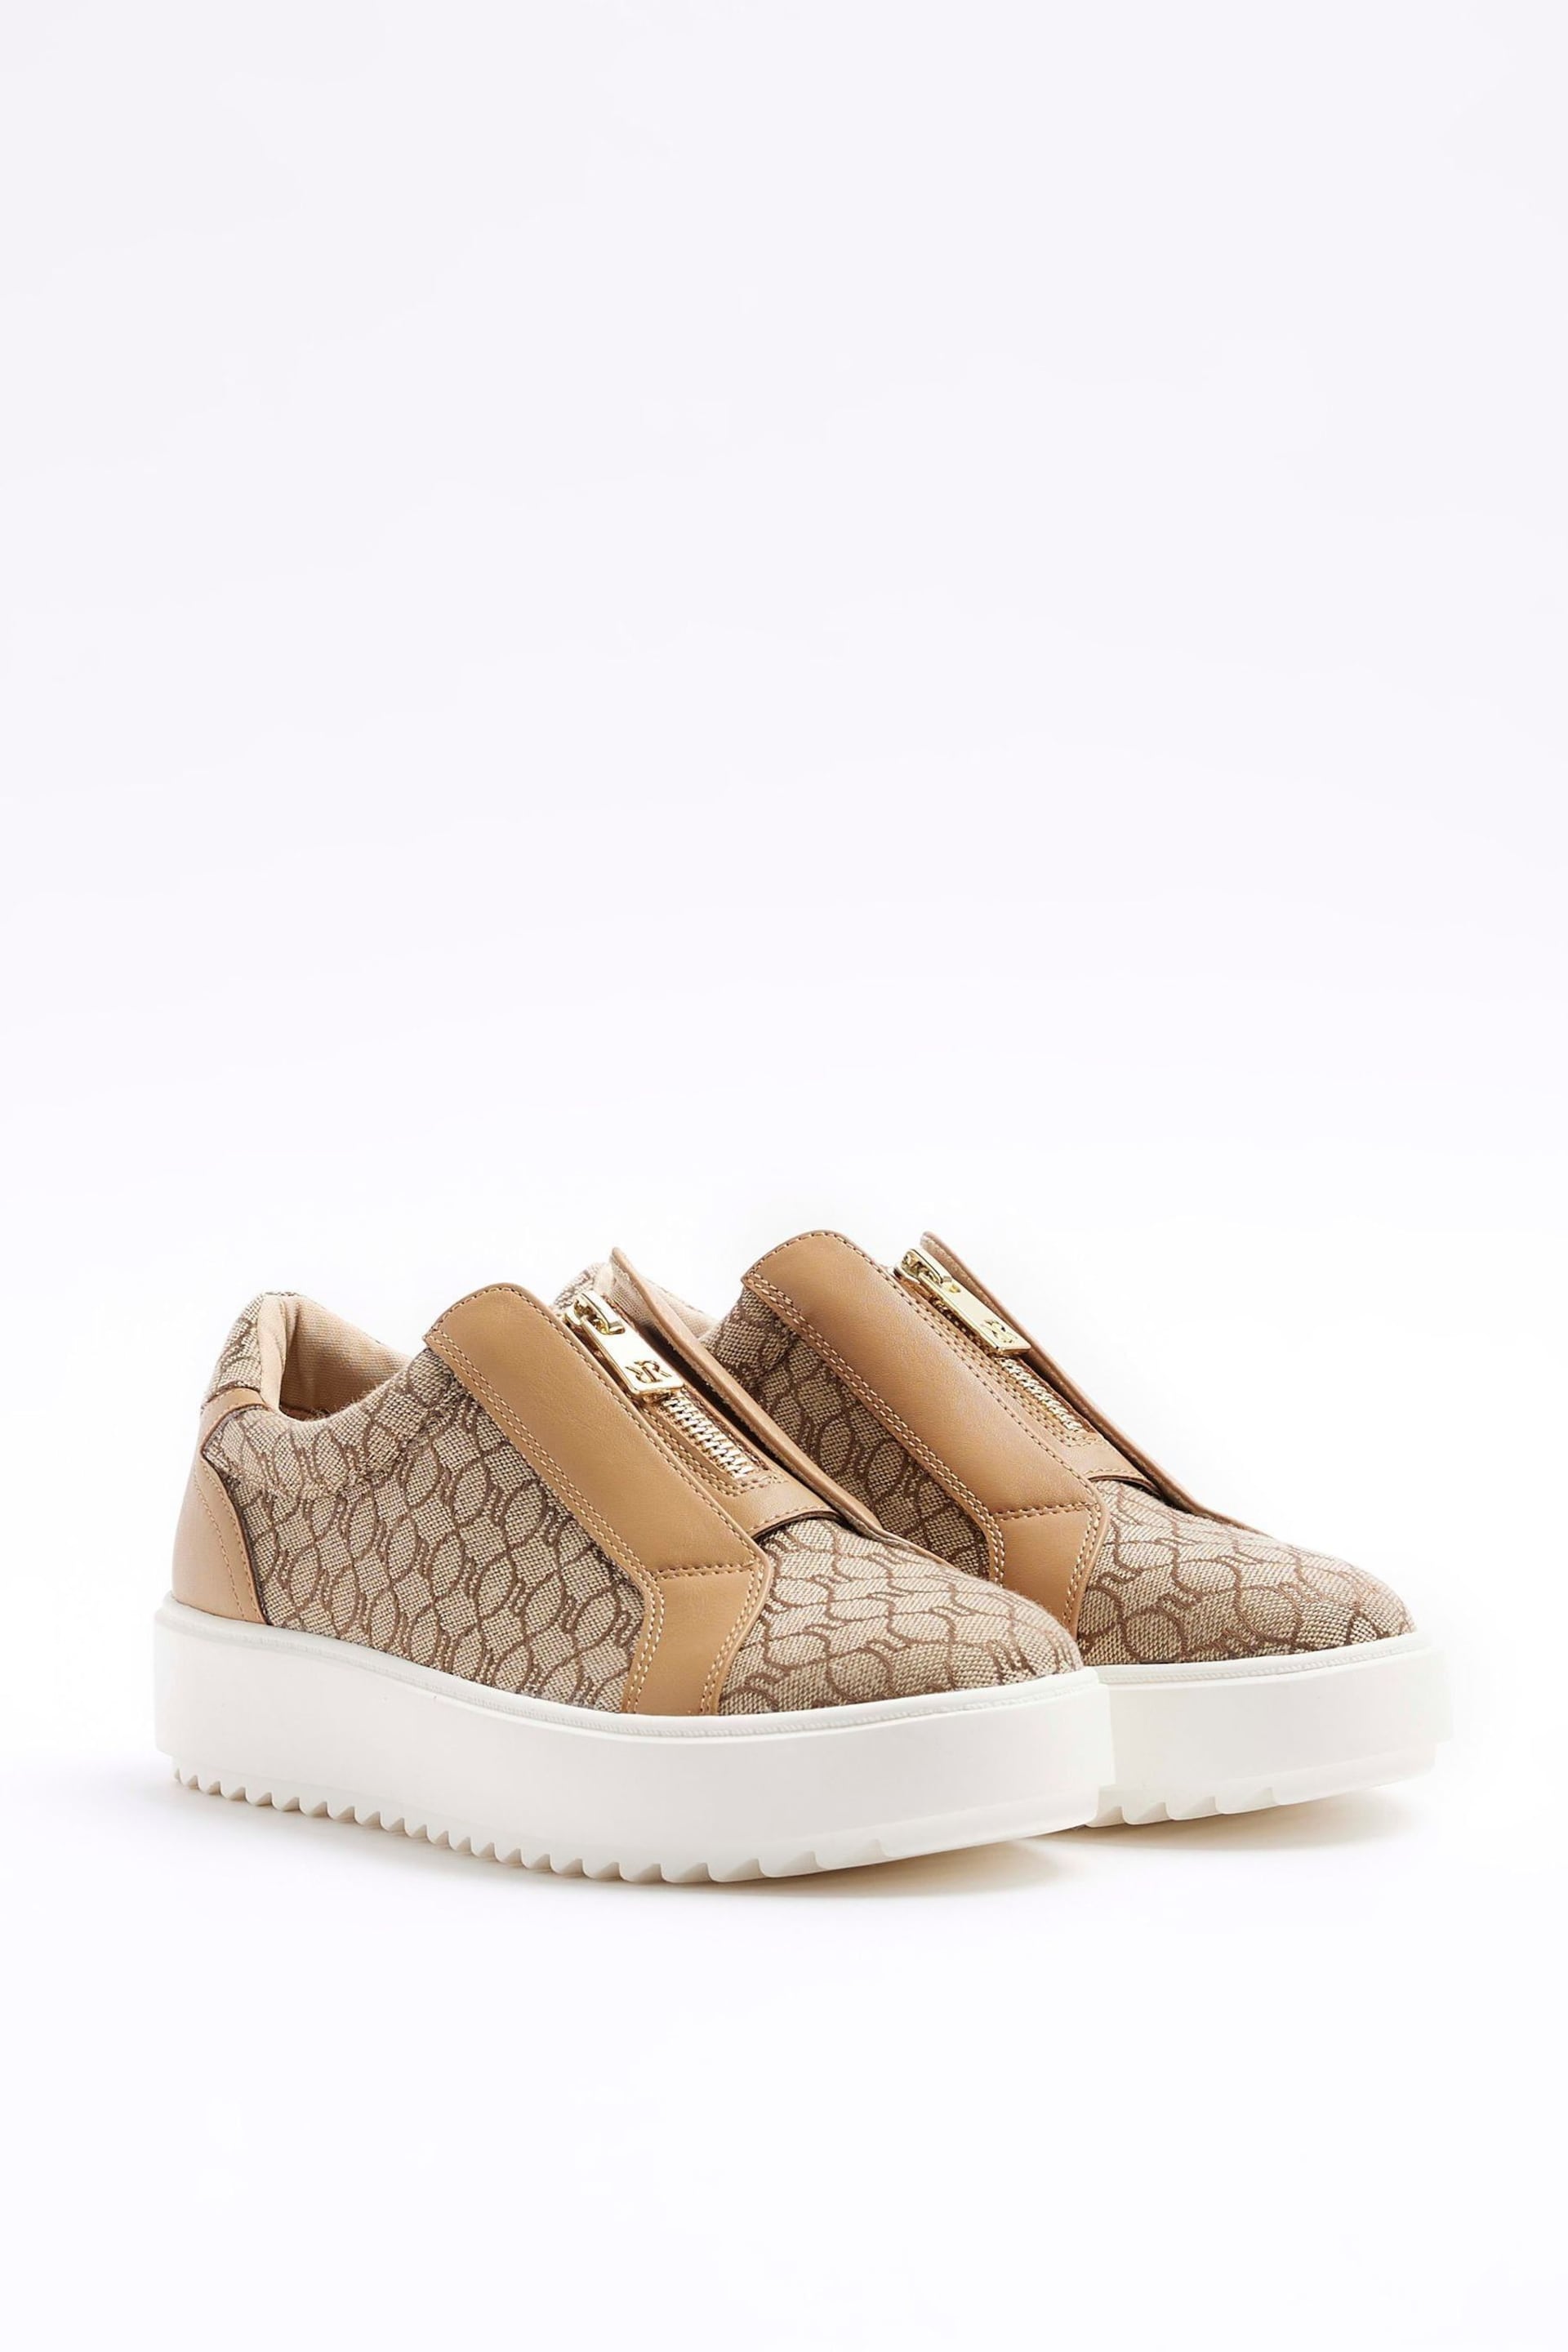 River Island Brown Slip-Ons Plimsole Trainers - Image 2 of 4